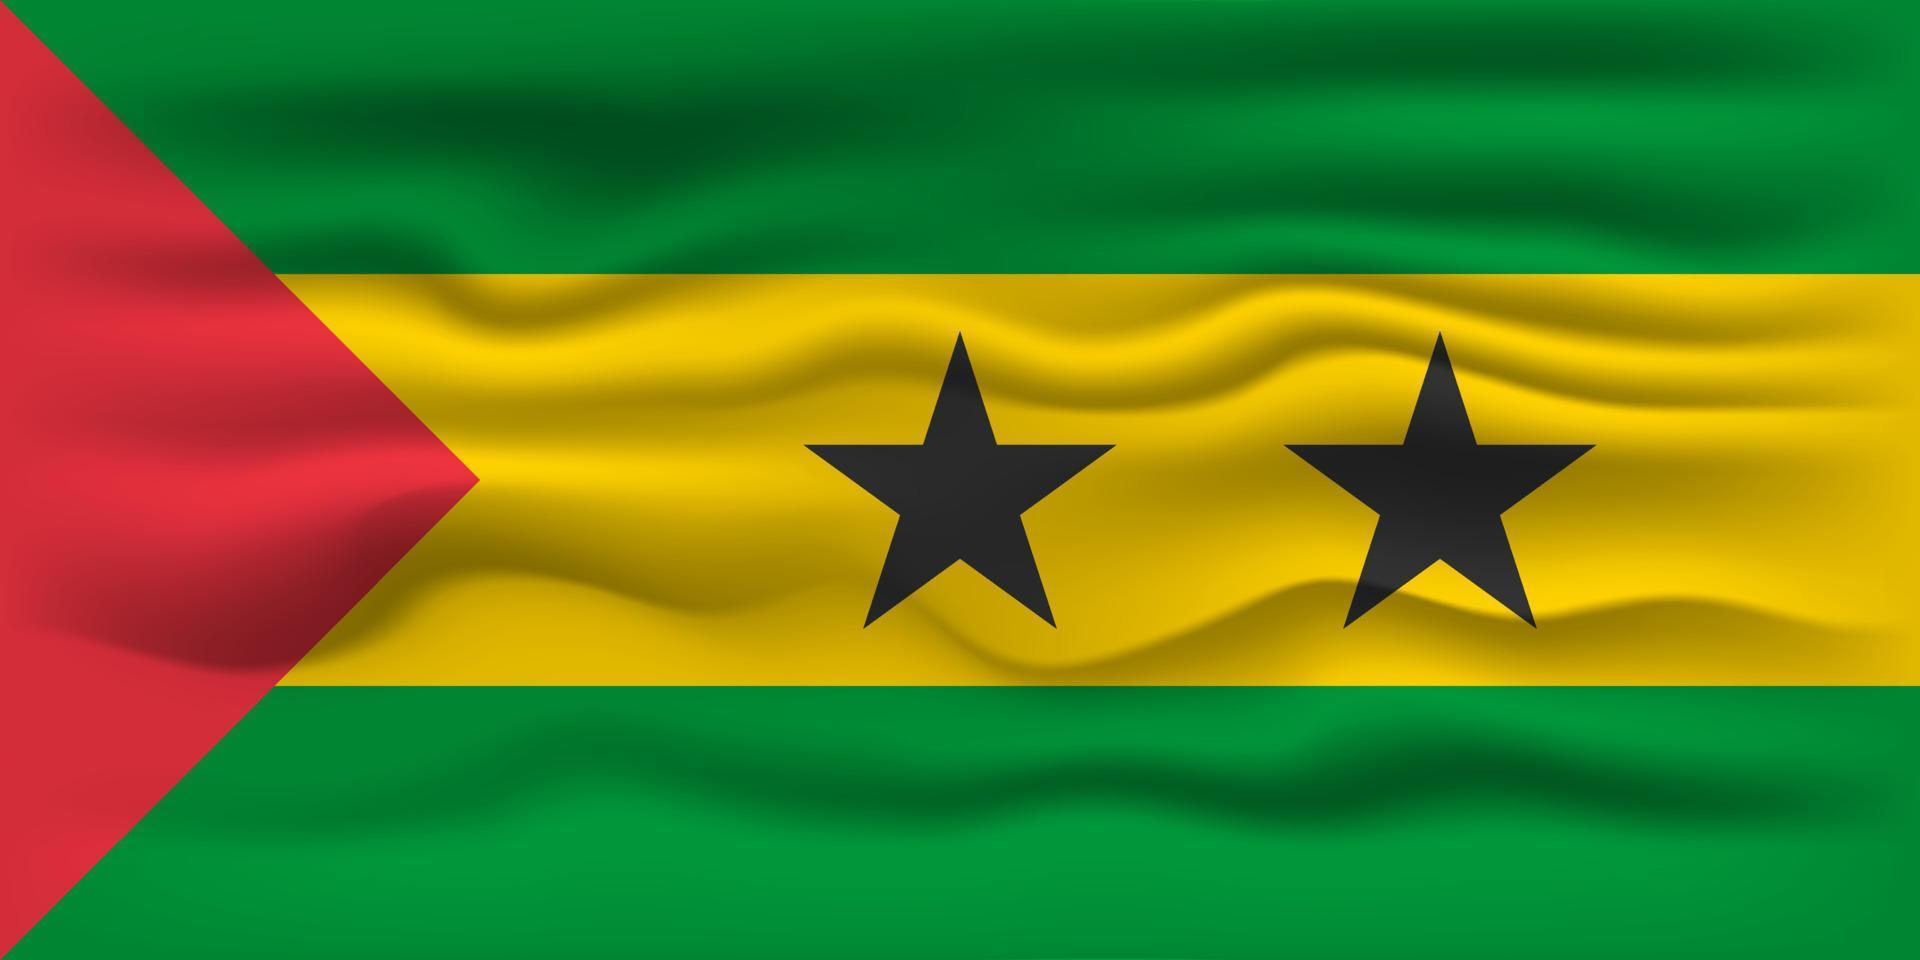 Waving flag of the country Sao Tome and Principe. Vector illustration.